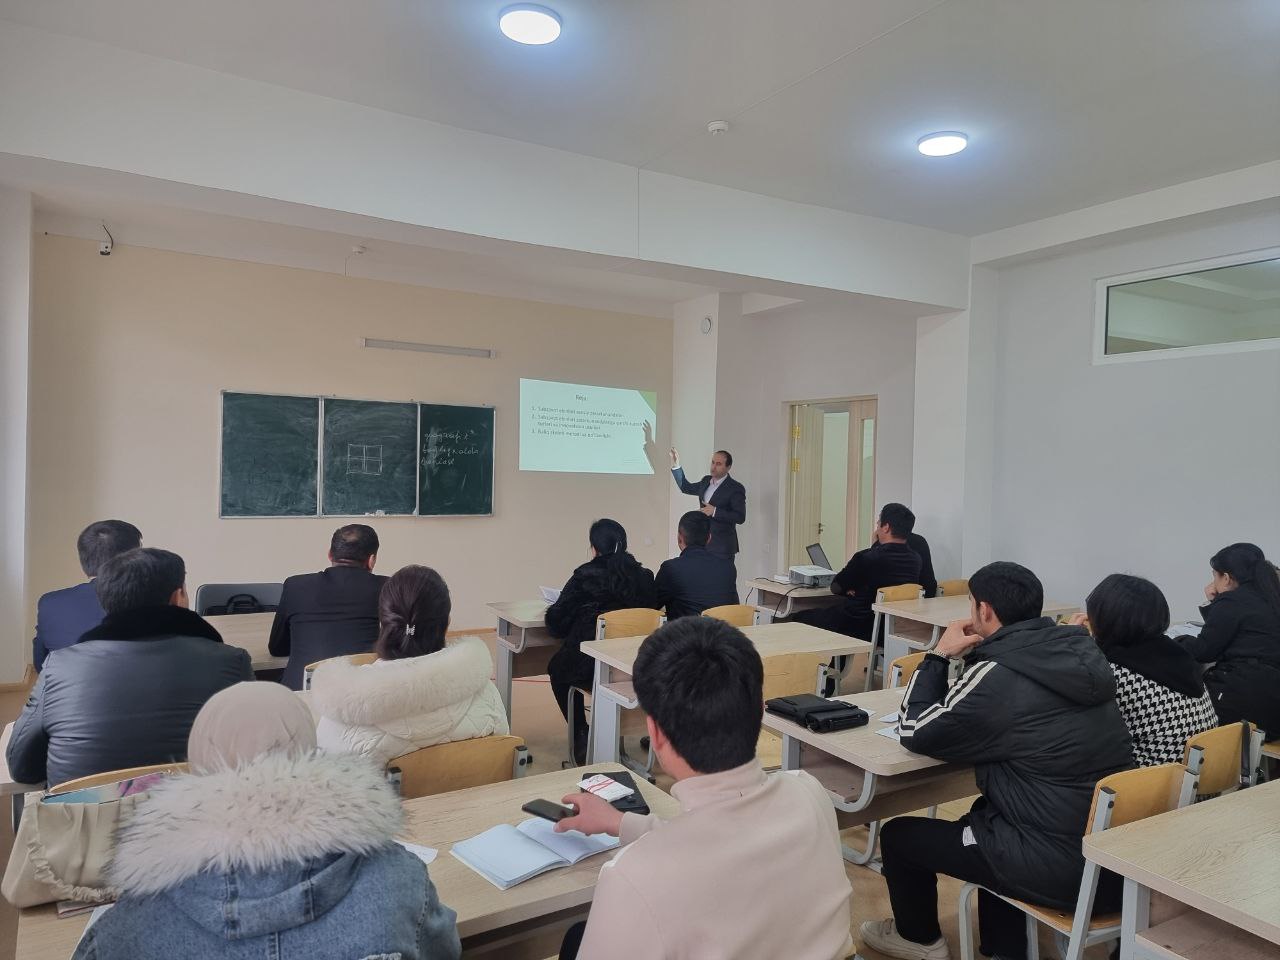 Scientific-theoretical seminar of Atajanov Temur, intern teacher of the Department of Fruit and Vegetables of Urganch State University on biological control of sucking and rodent pests in Khorezm region